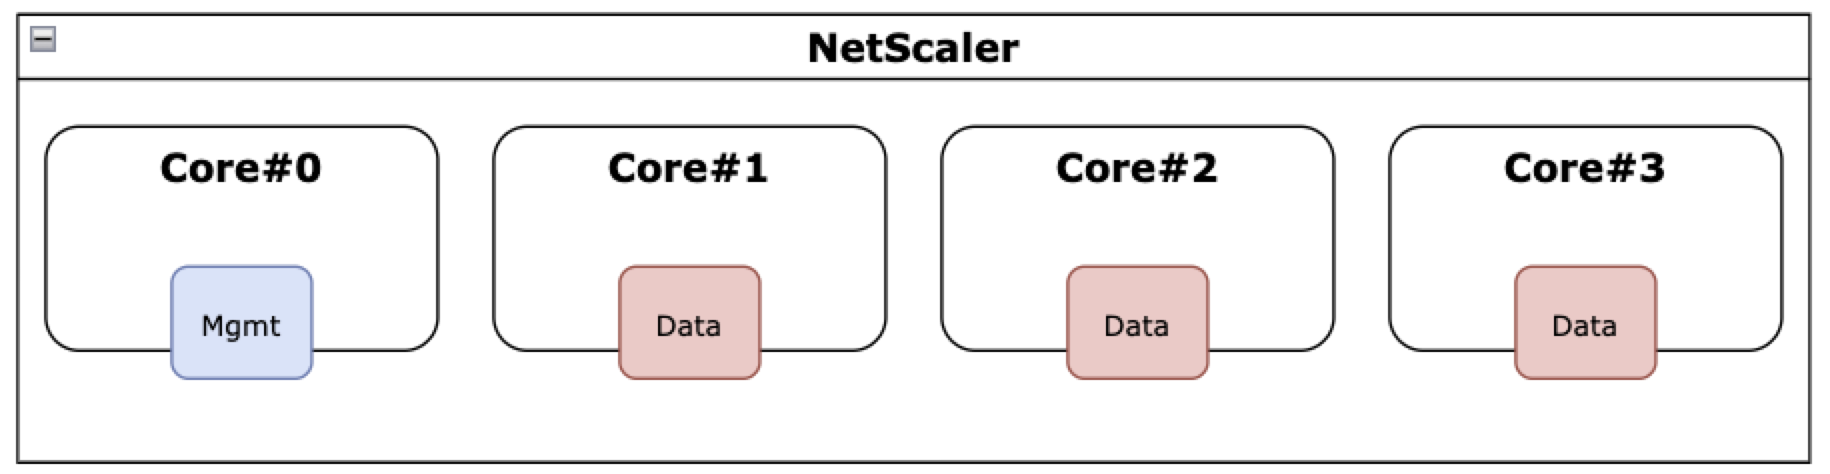 NetScaler without SMT feature